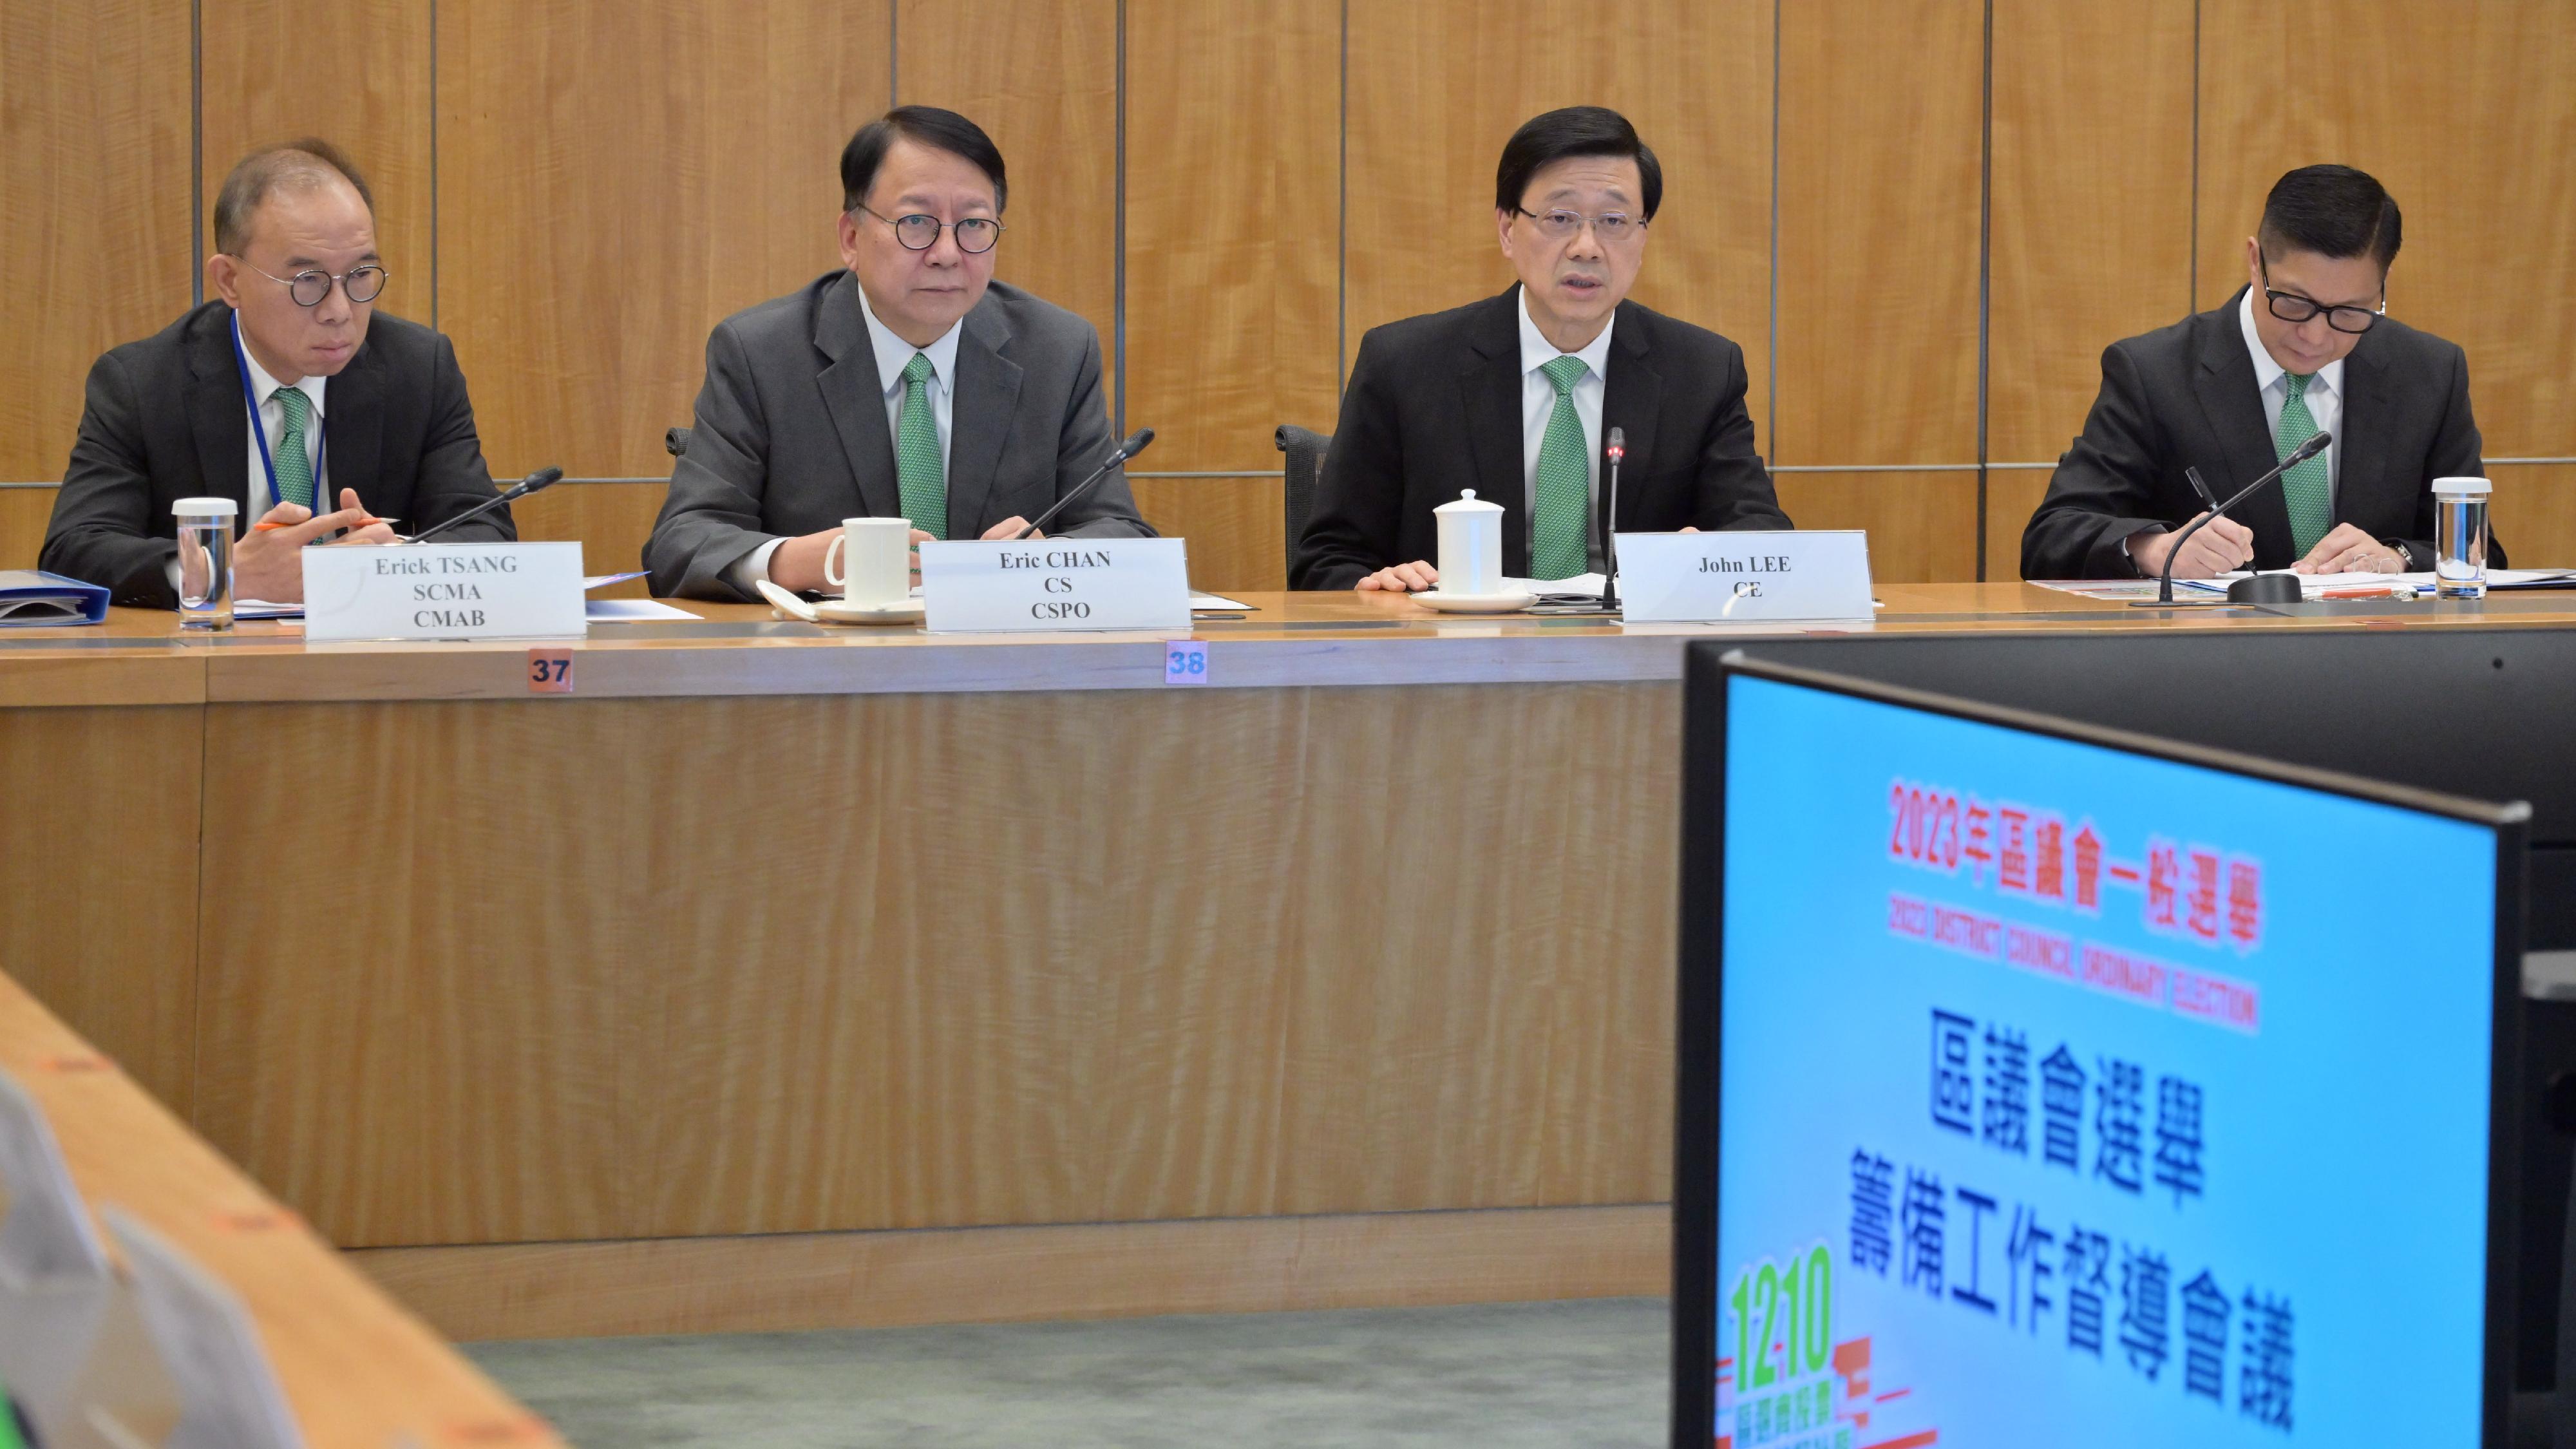 The Chief Executive, Mr John Lee (second right), convened the cross-bureau and interdepartmental steering meeting on the preparatory work for the District Council Ordinary Election today (November 23). The Chief Secretary for Administration, Mr Chan Kwok-ki (second left), the Secretary for Constitutional and Mainland Affairs, Mr Erick Tsang Kwok-wai (first left), and the Secretary for Security, Mr Tang Ping-keung (first right), reported to the Chief Executive their progress and coordination work regarding the preparatory work for the election.